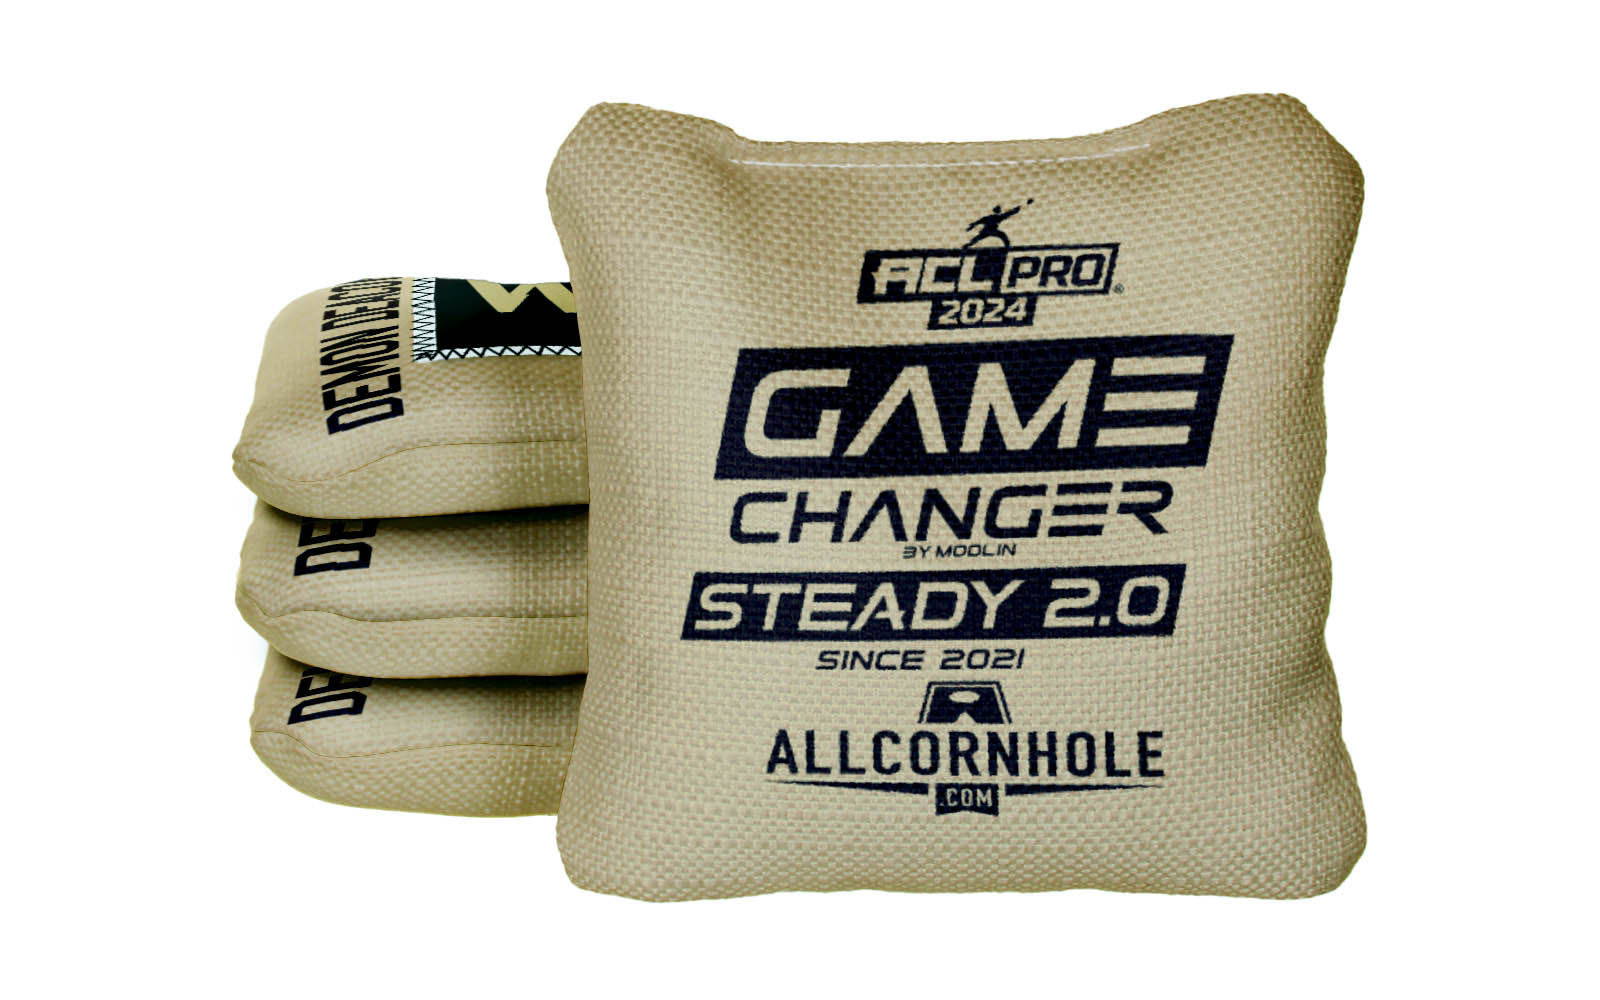 Officially Licensed Collegiate Cornhole Bags - AllCornhole Game Changers Steady 2.0 - Set of 4 - Wake Forest University